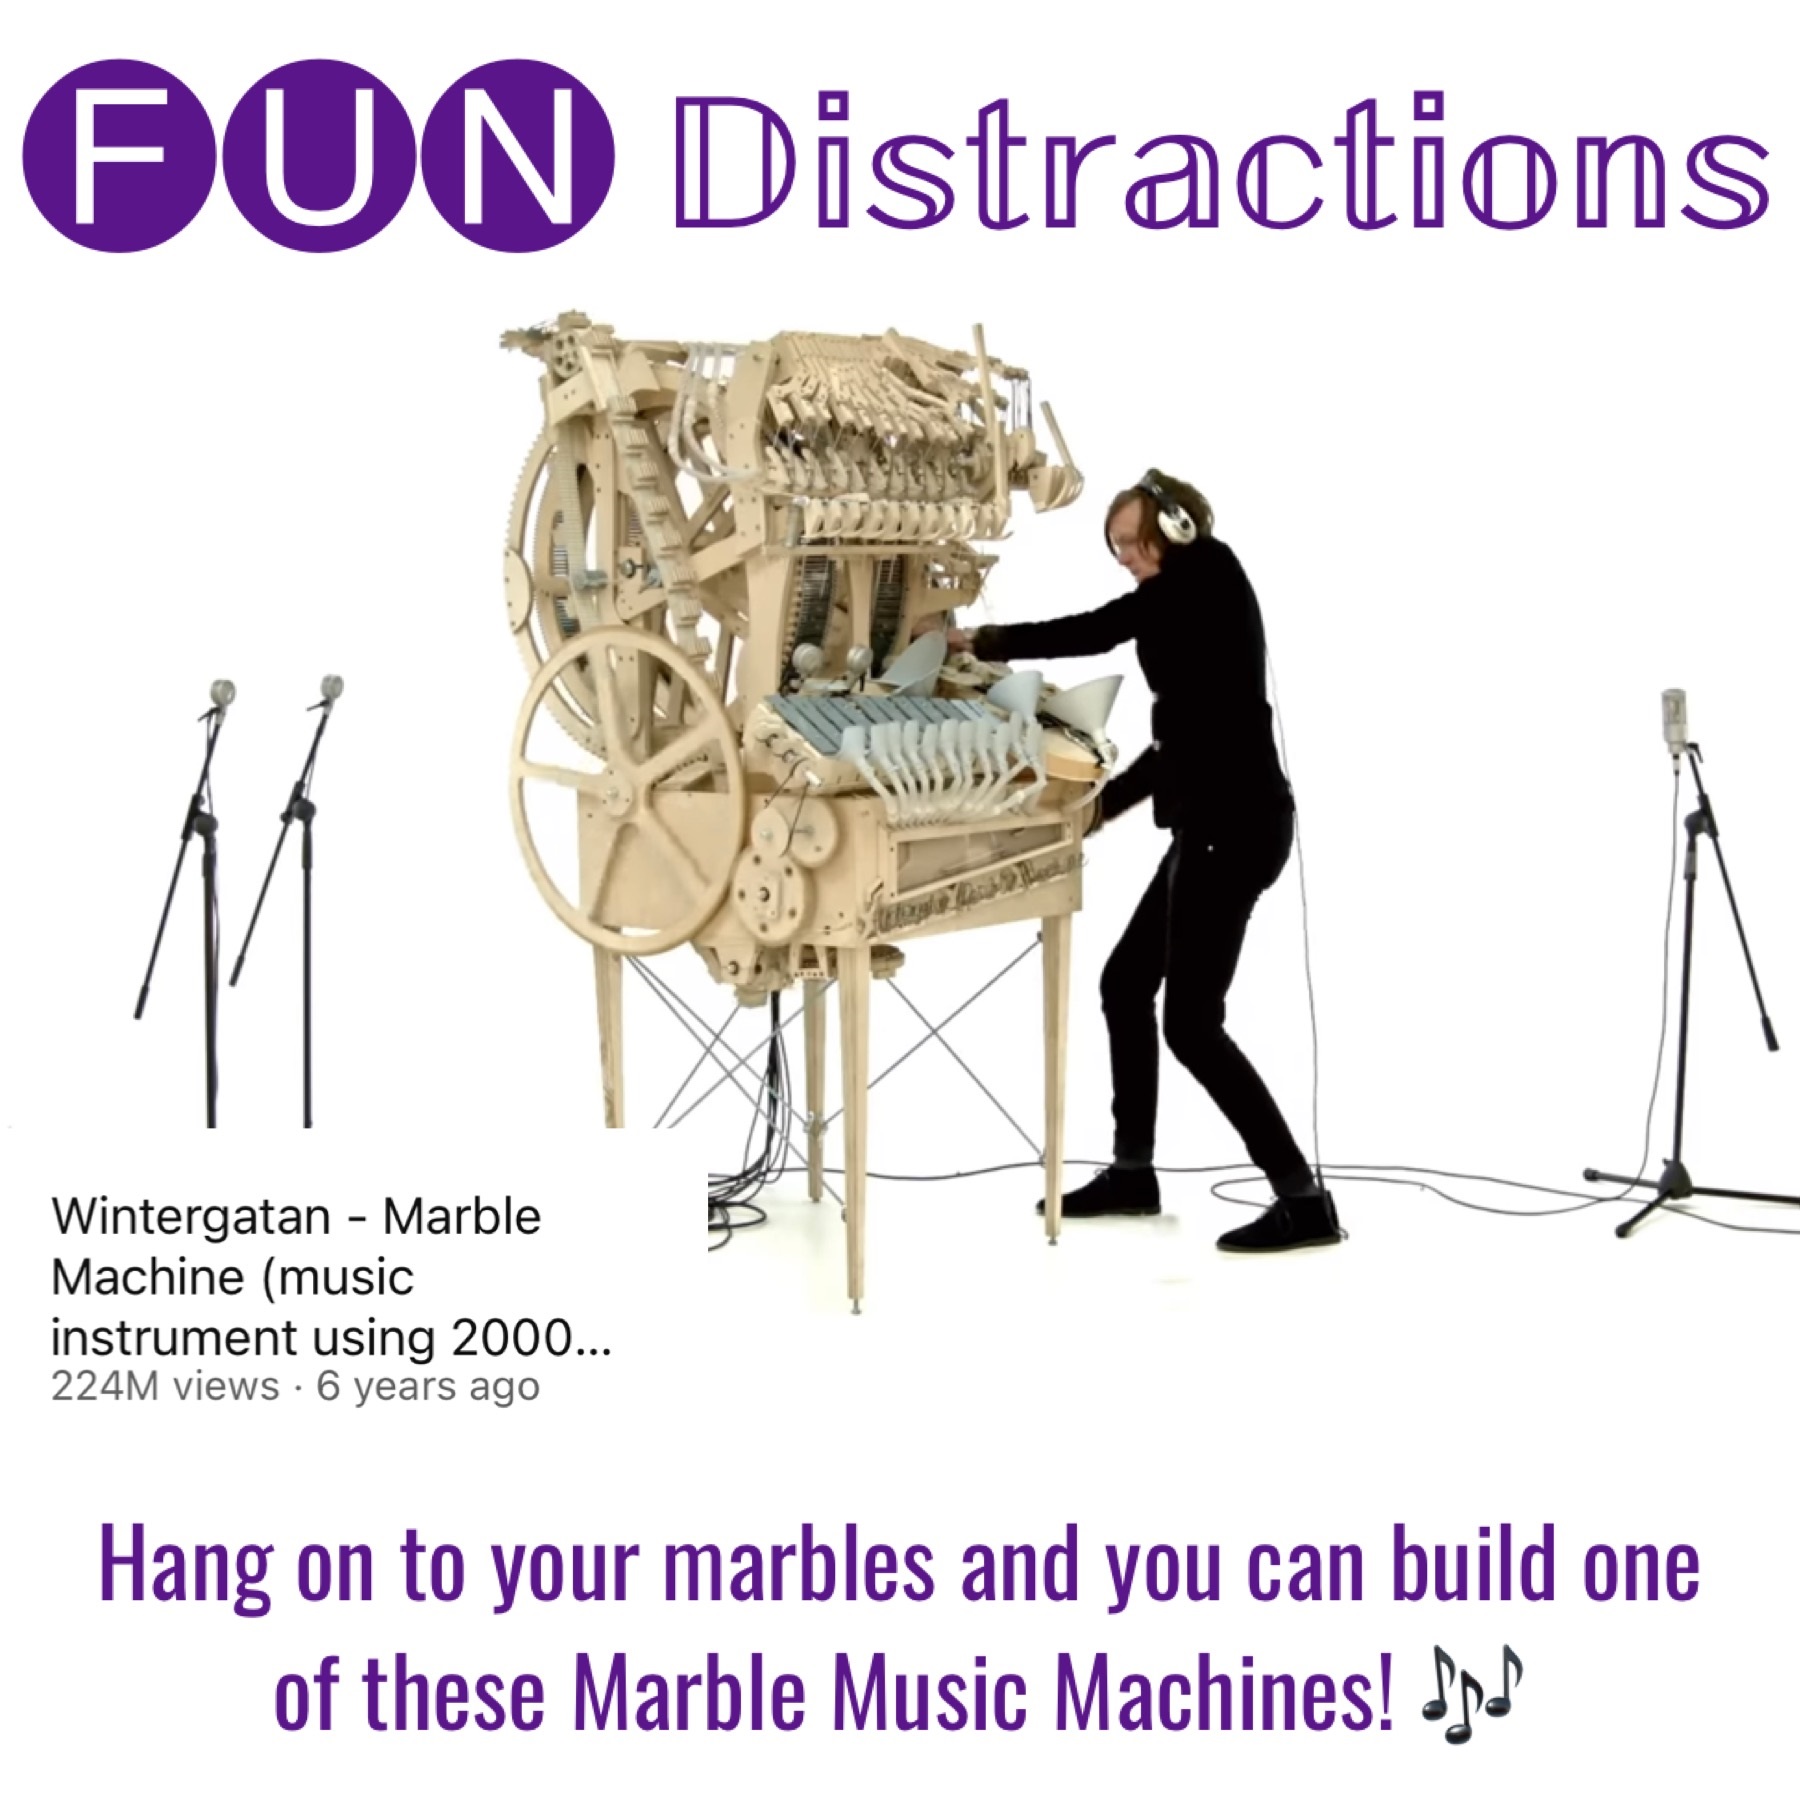 Image of a man playing with a marble music machine.